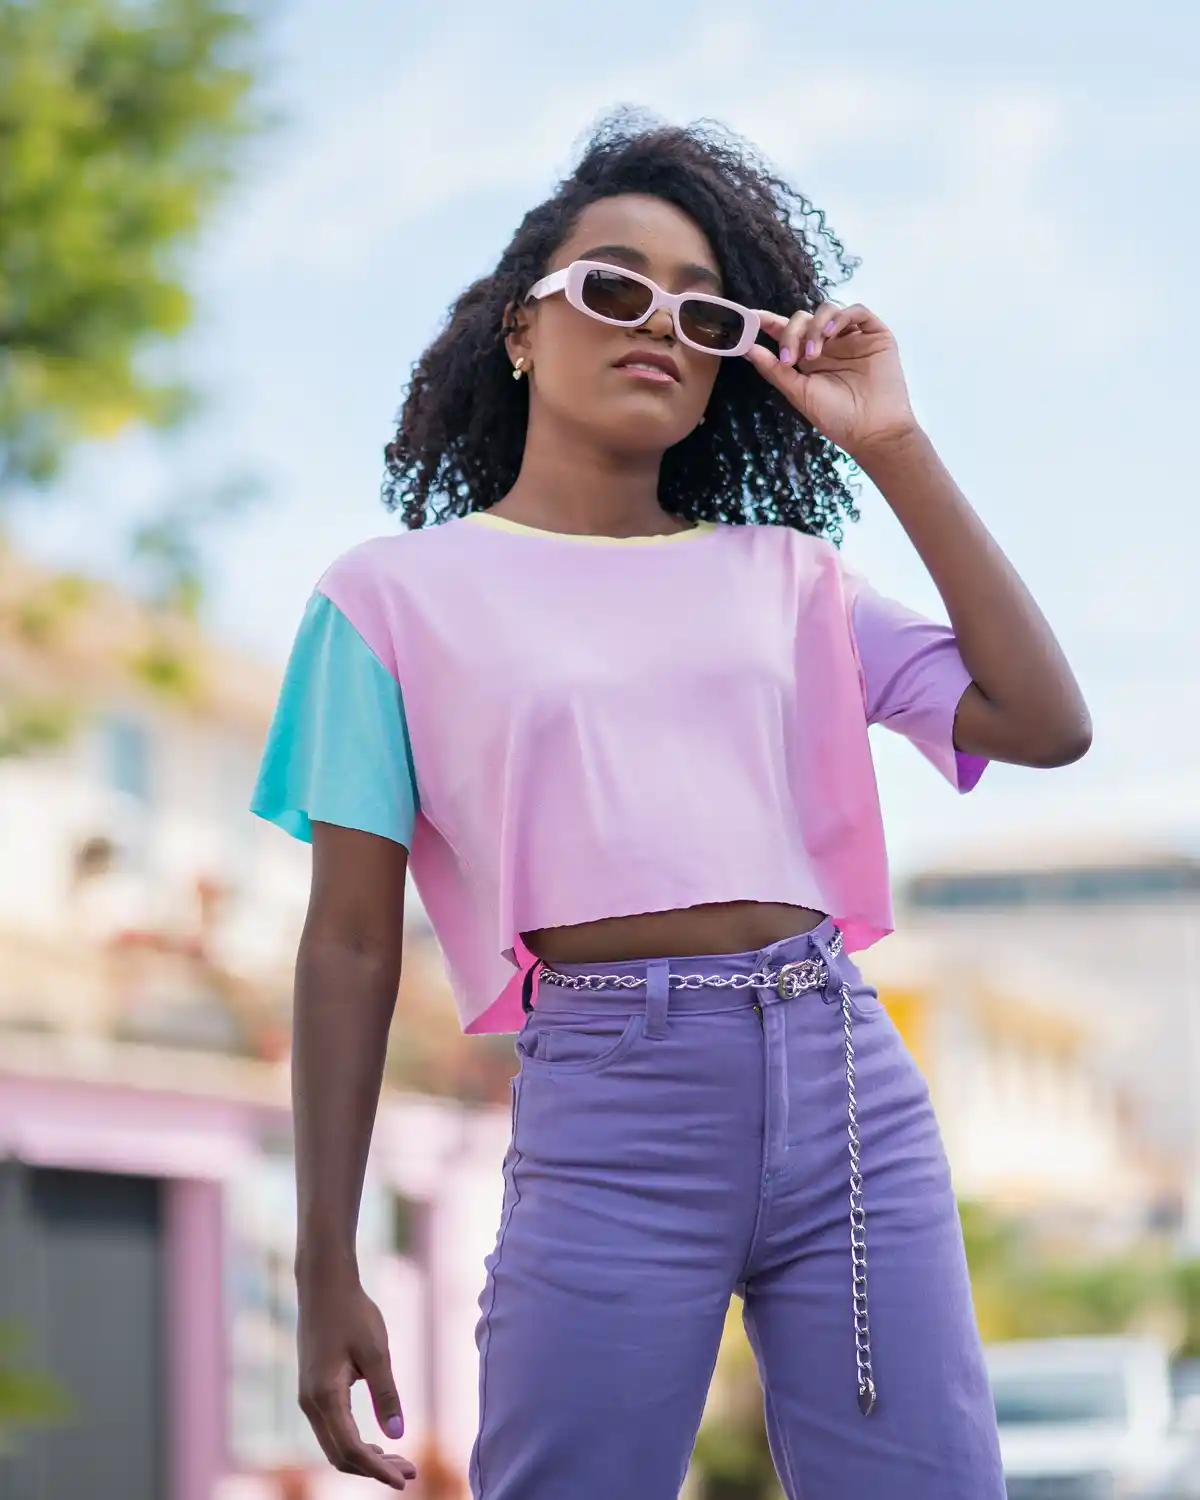 What to wear with purple pants Best outfit ideas for females